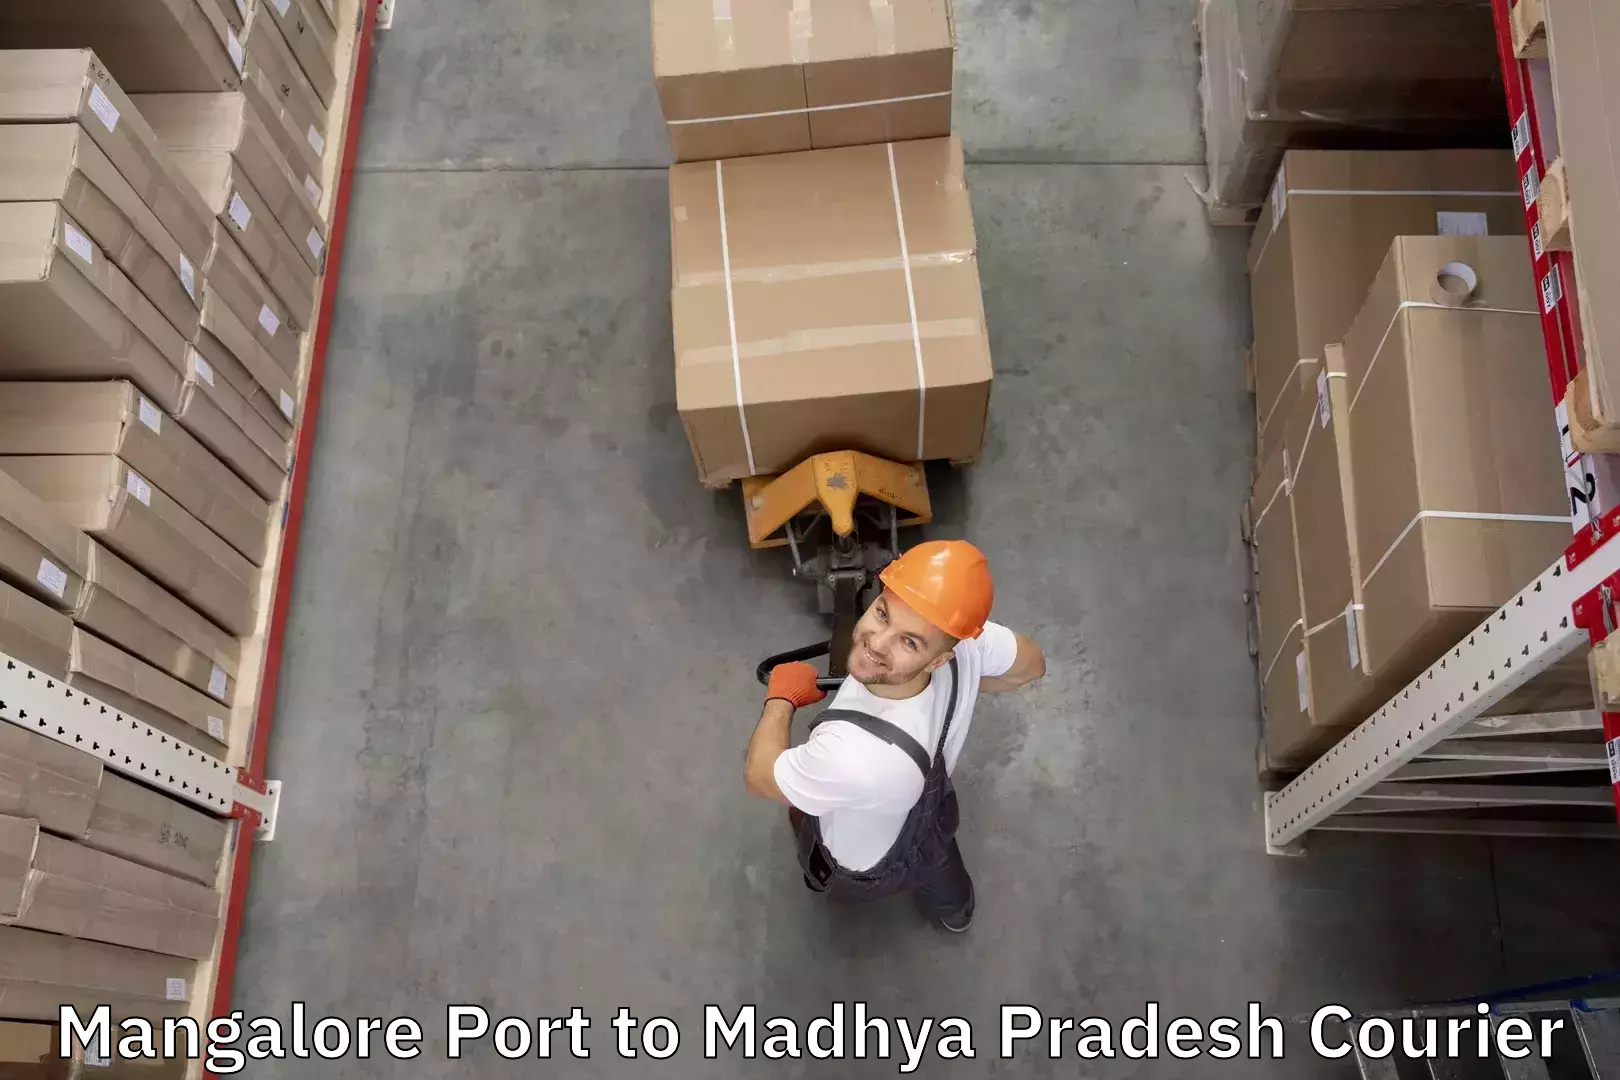 Baggage shipping service Mangalore Port to Shahdol